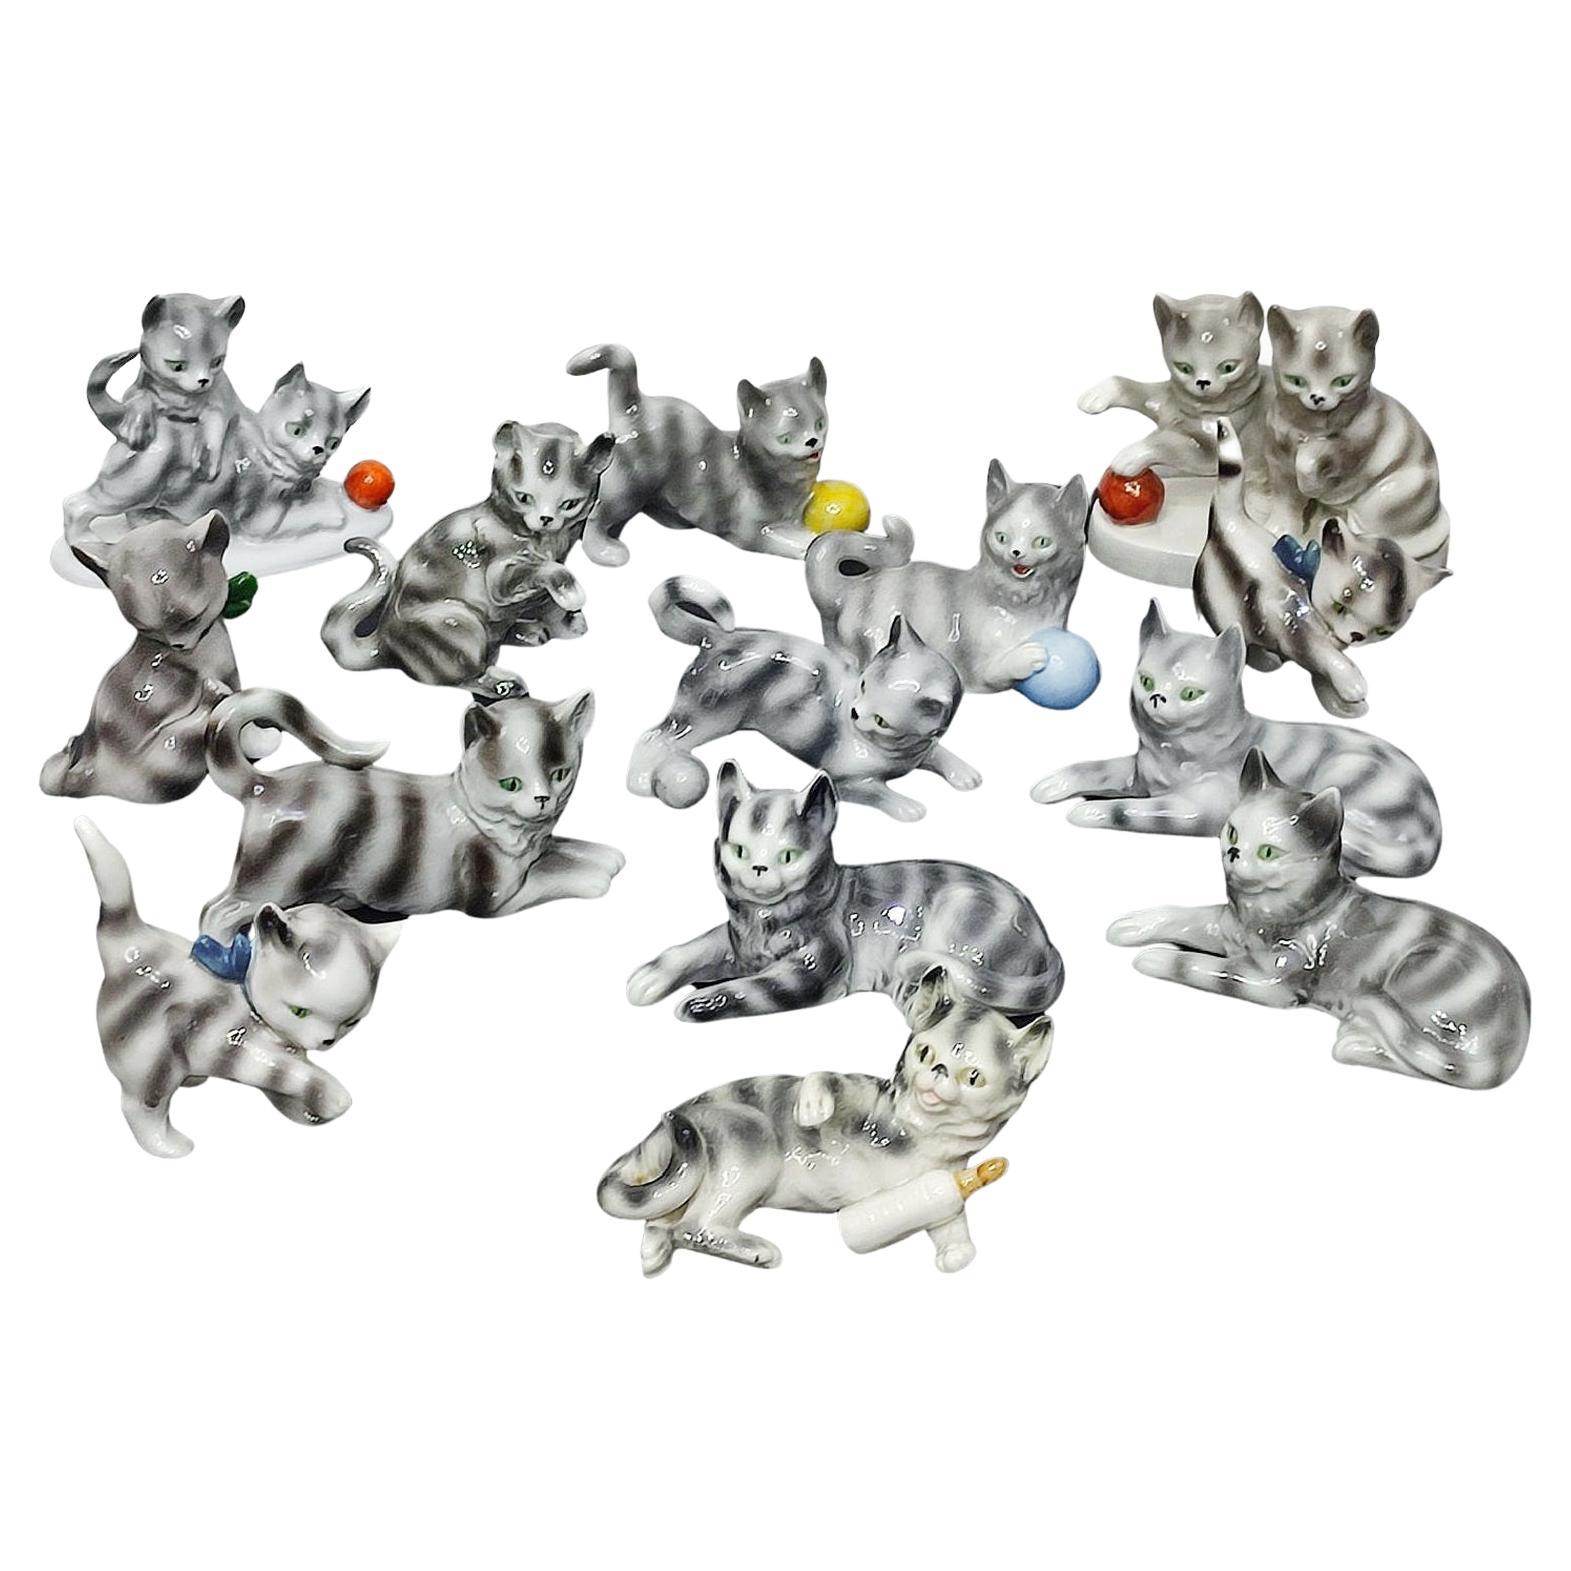 Carl Scheidig Gräfenthal Collection of Cat Figurines, Germany 1940s For Sale